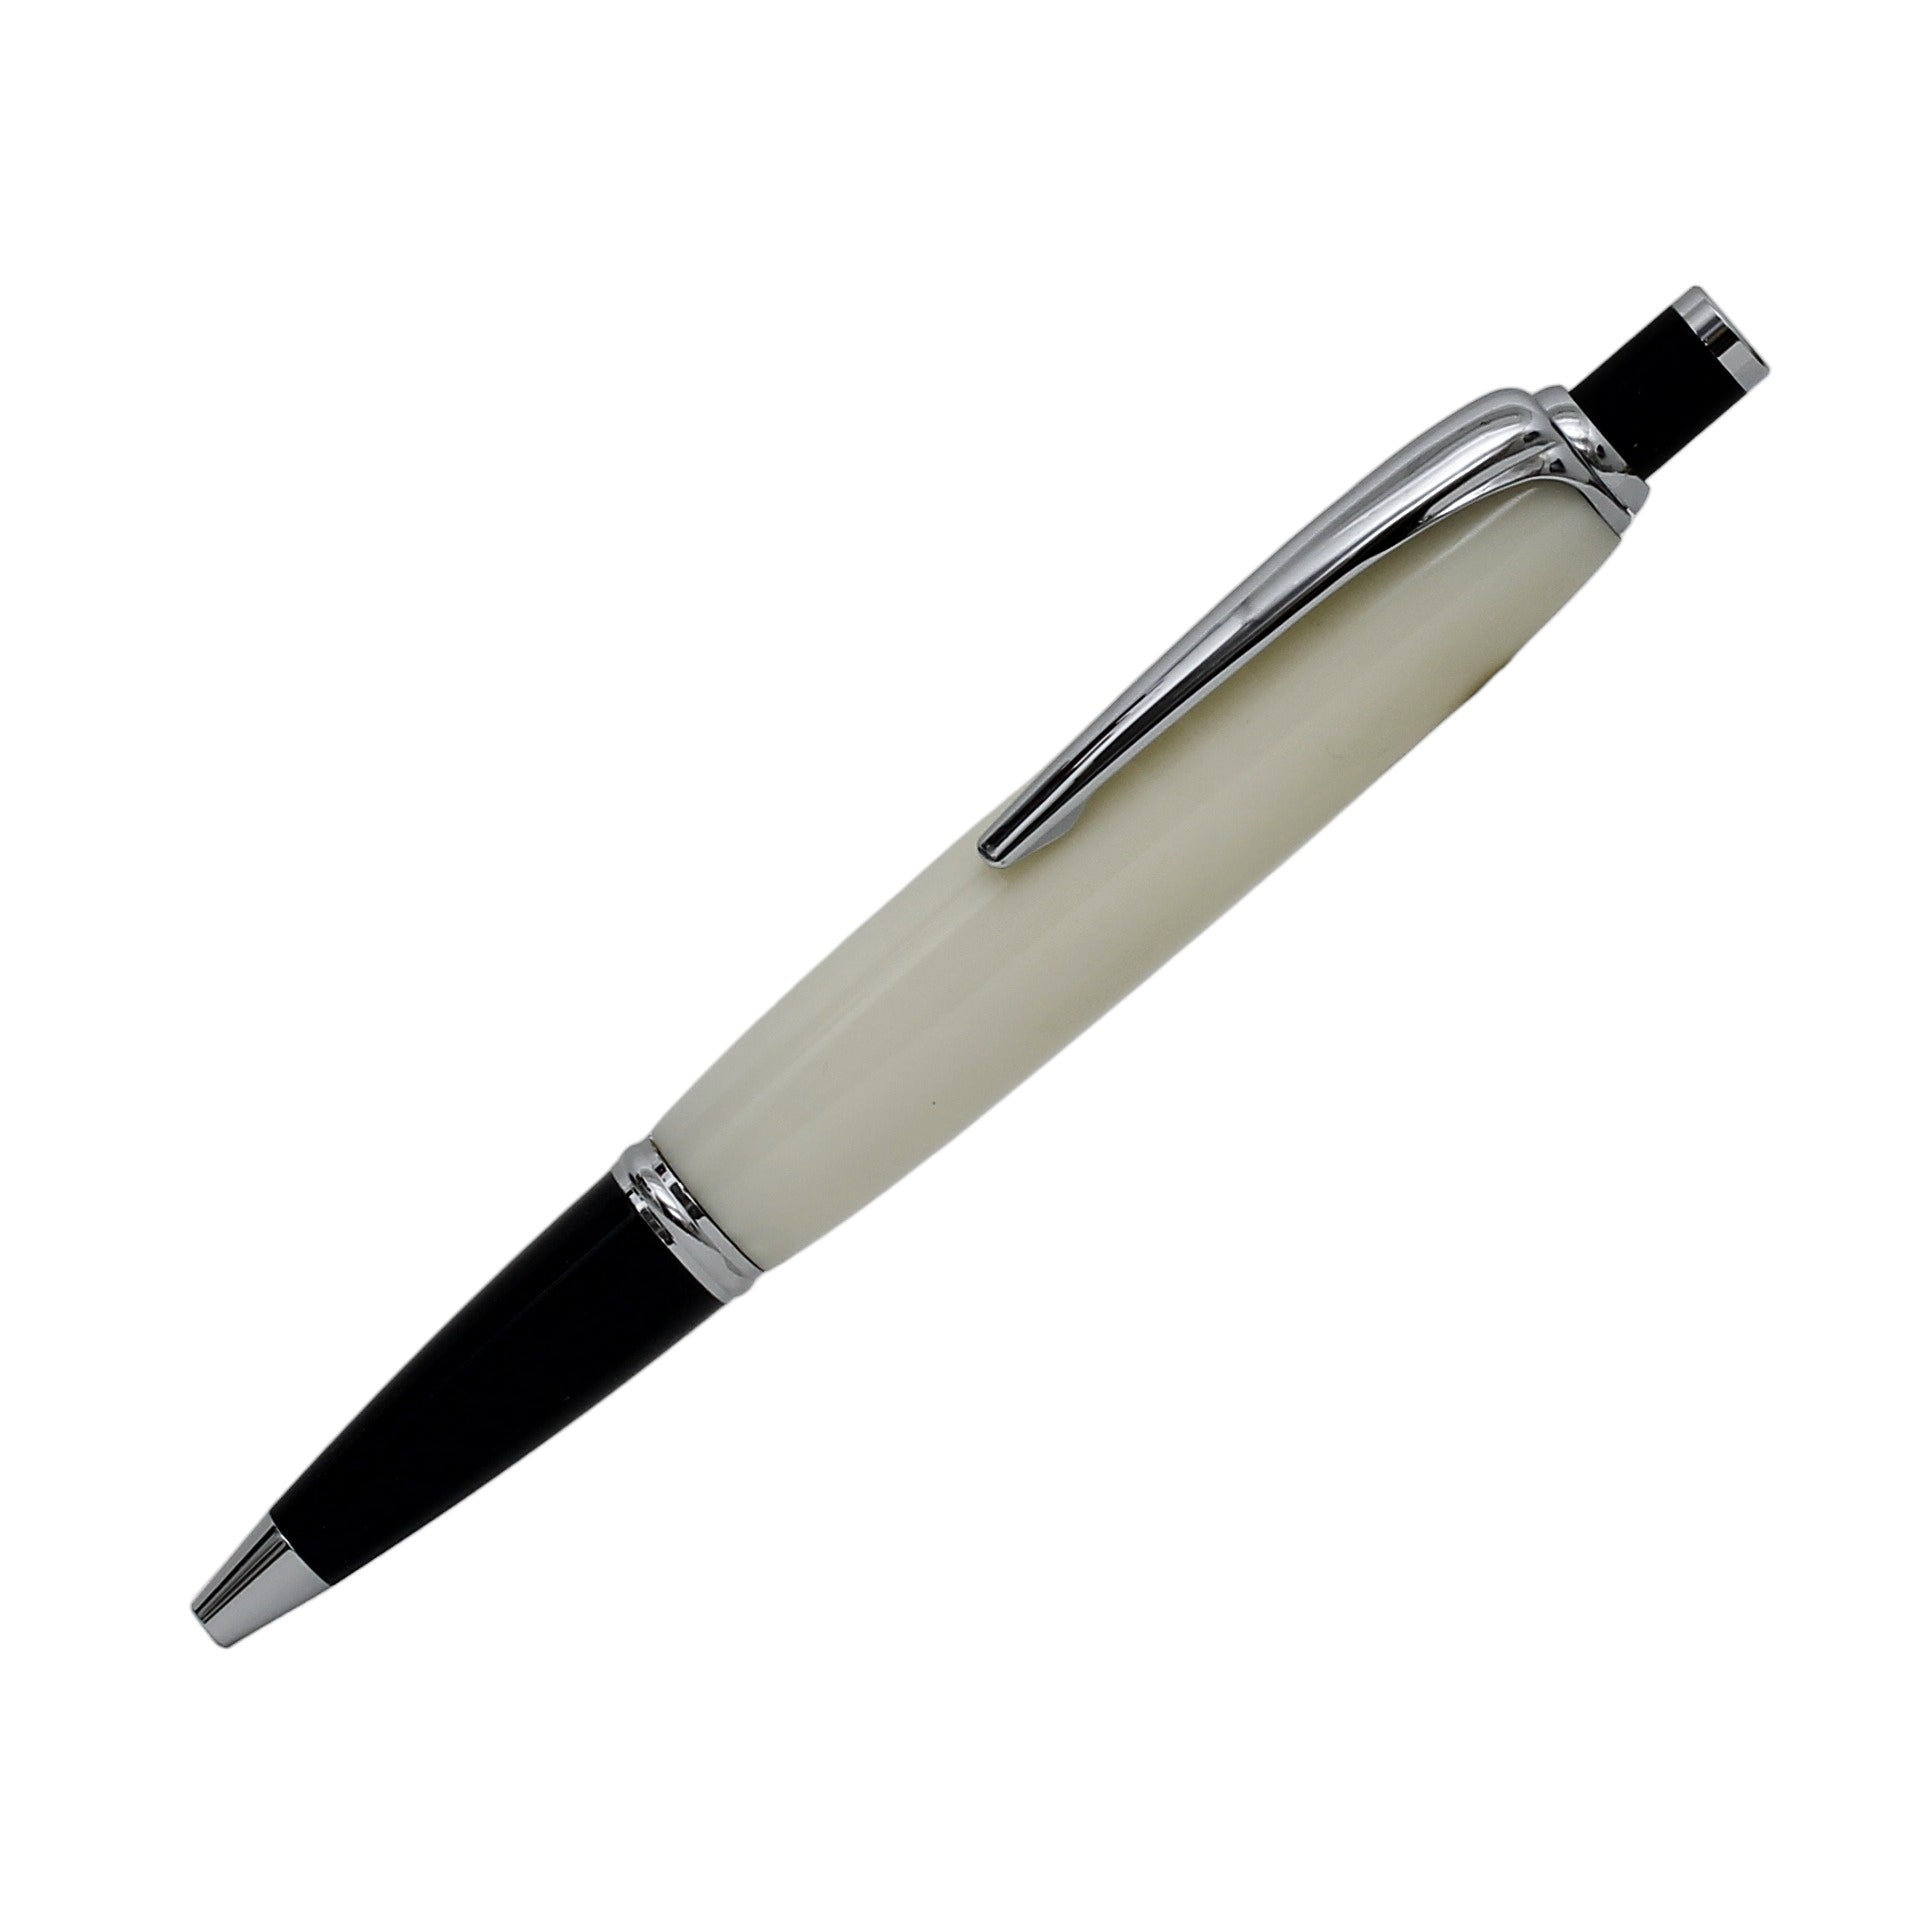 ART-PEN: Handcrafted Luxury Click Pen - Chrome finish with CREAM acrylic hand turned body - Artistica.com